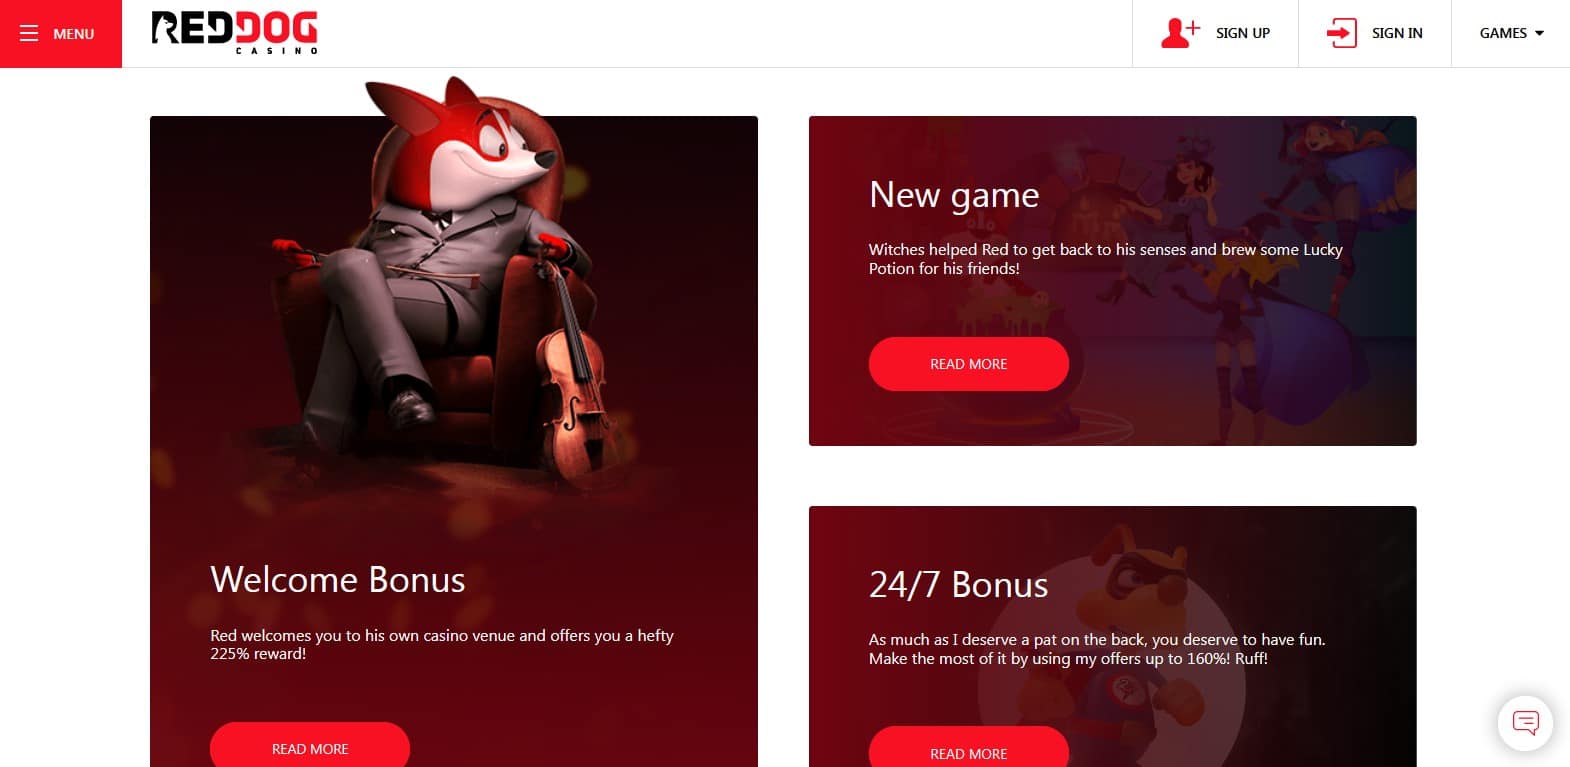 Red Dog Casino Bonuses and Promotions